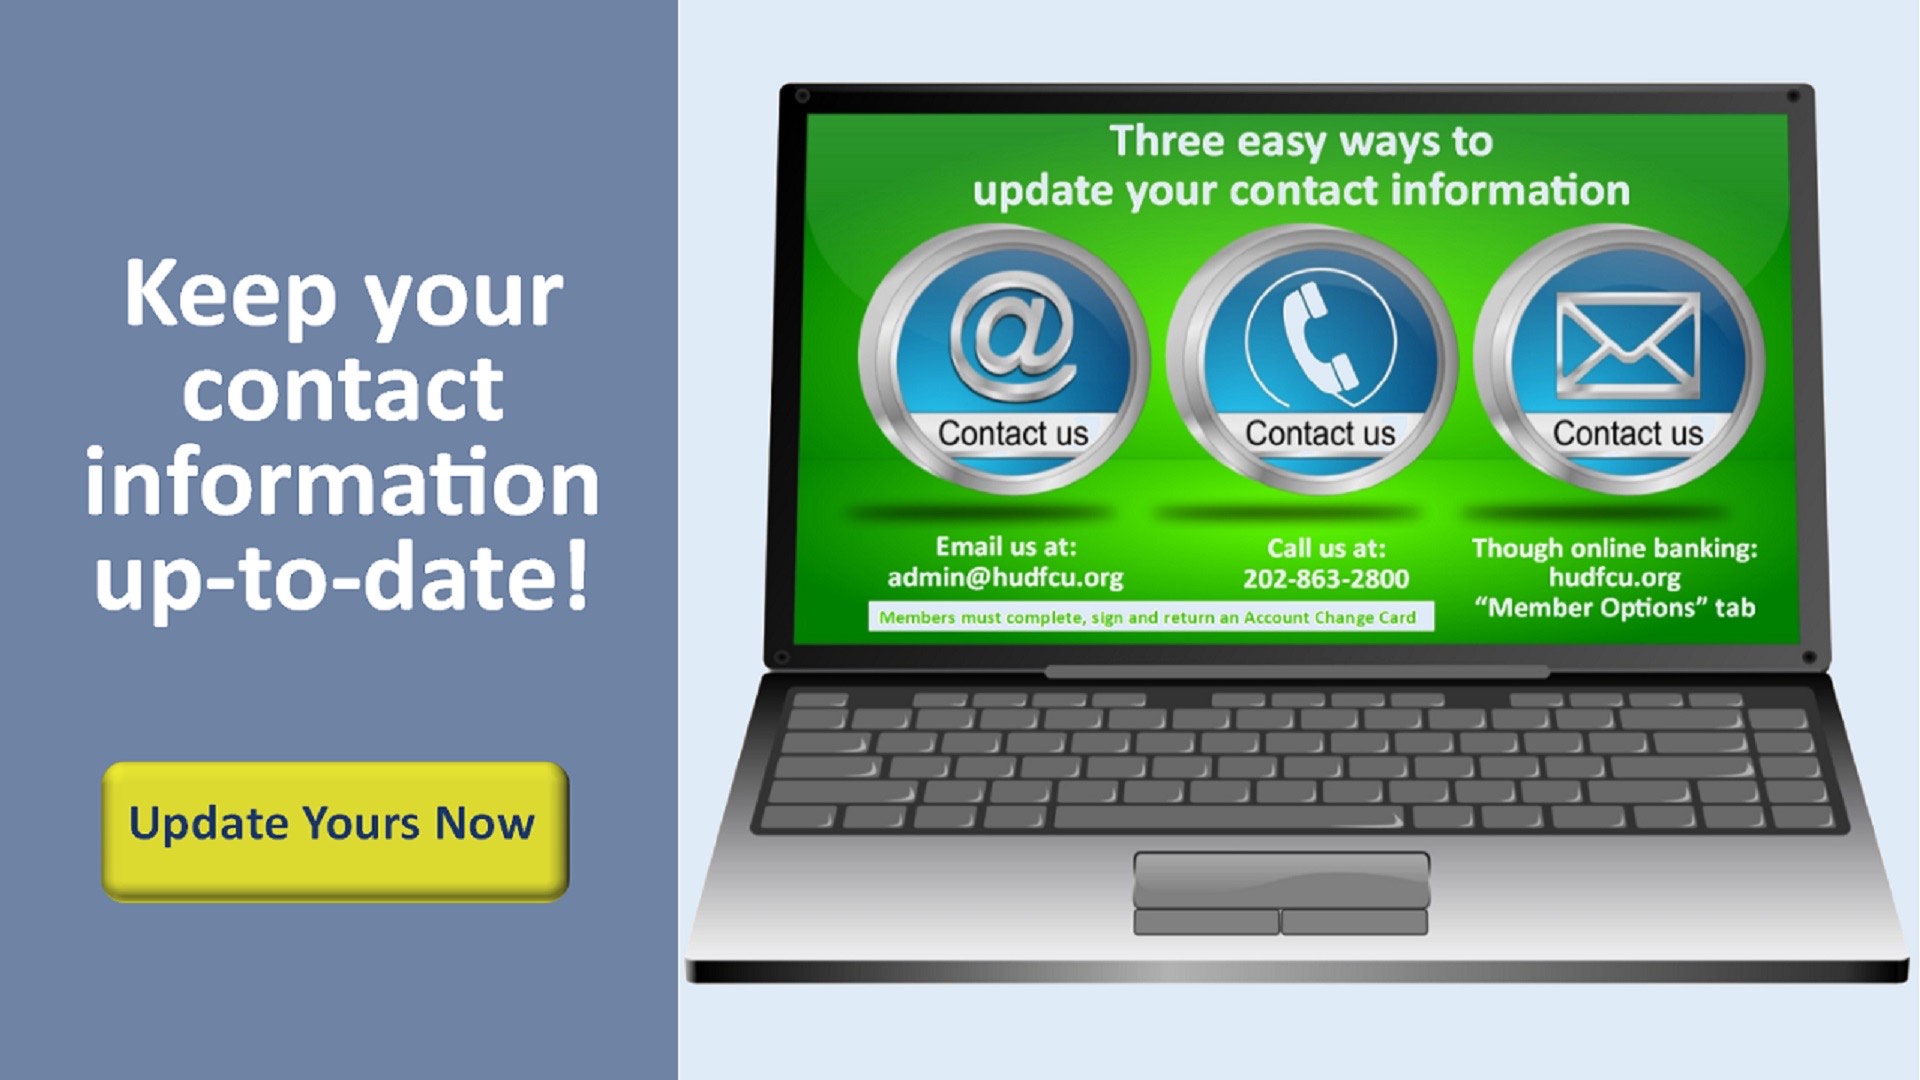 Keep your contact information up to date!